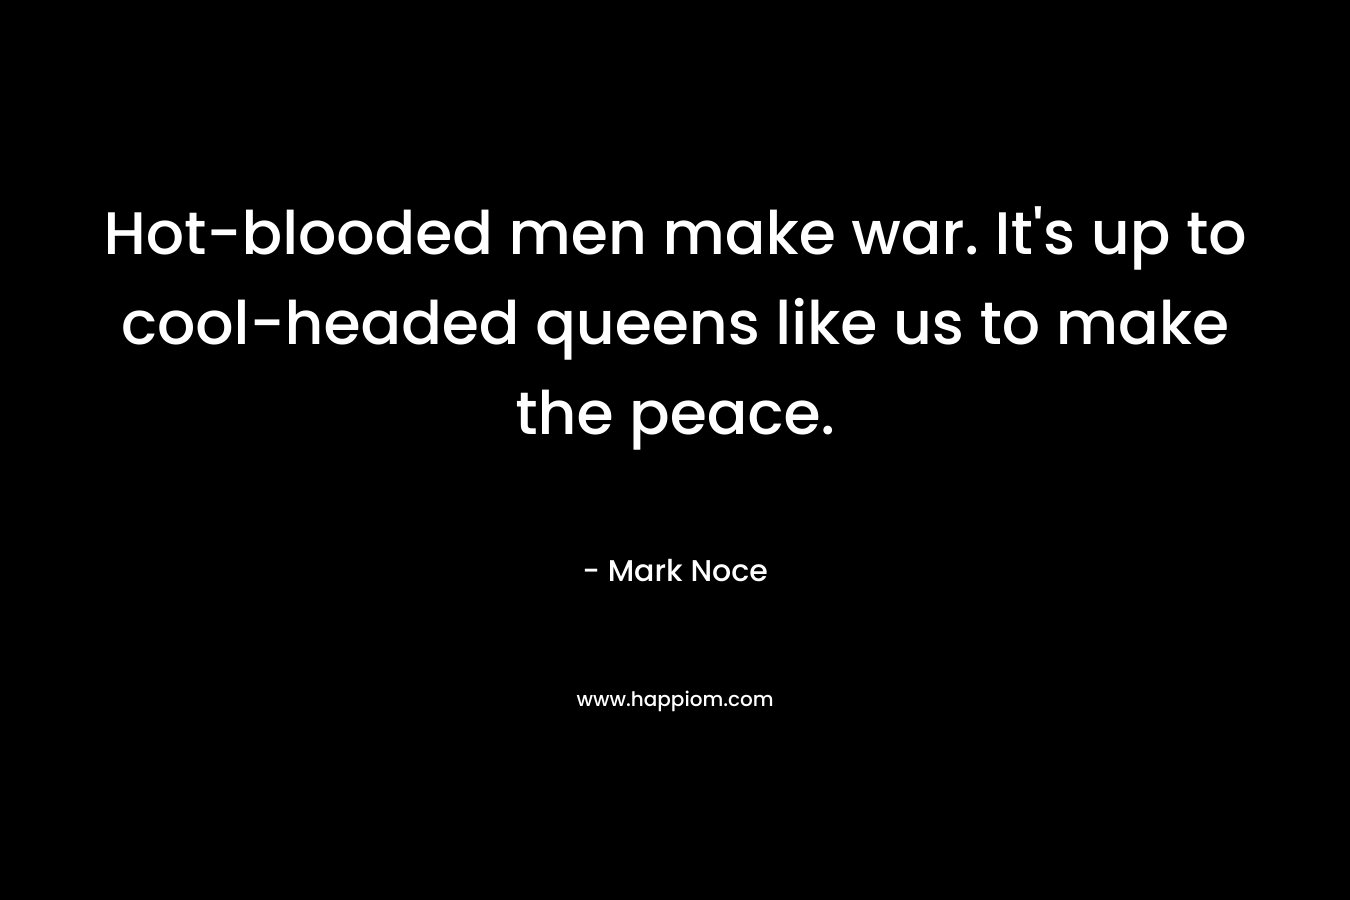 Hot-blooded men make war. It’s up to cool-headed queens like us to make the peace. – Mark Noce